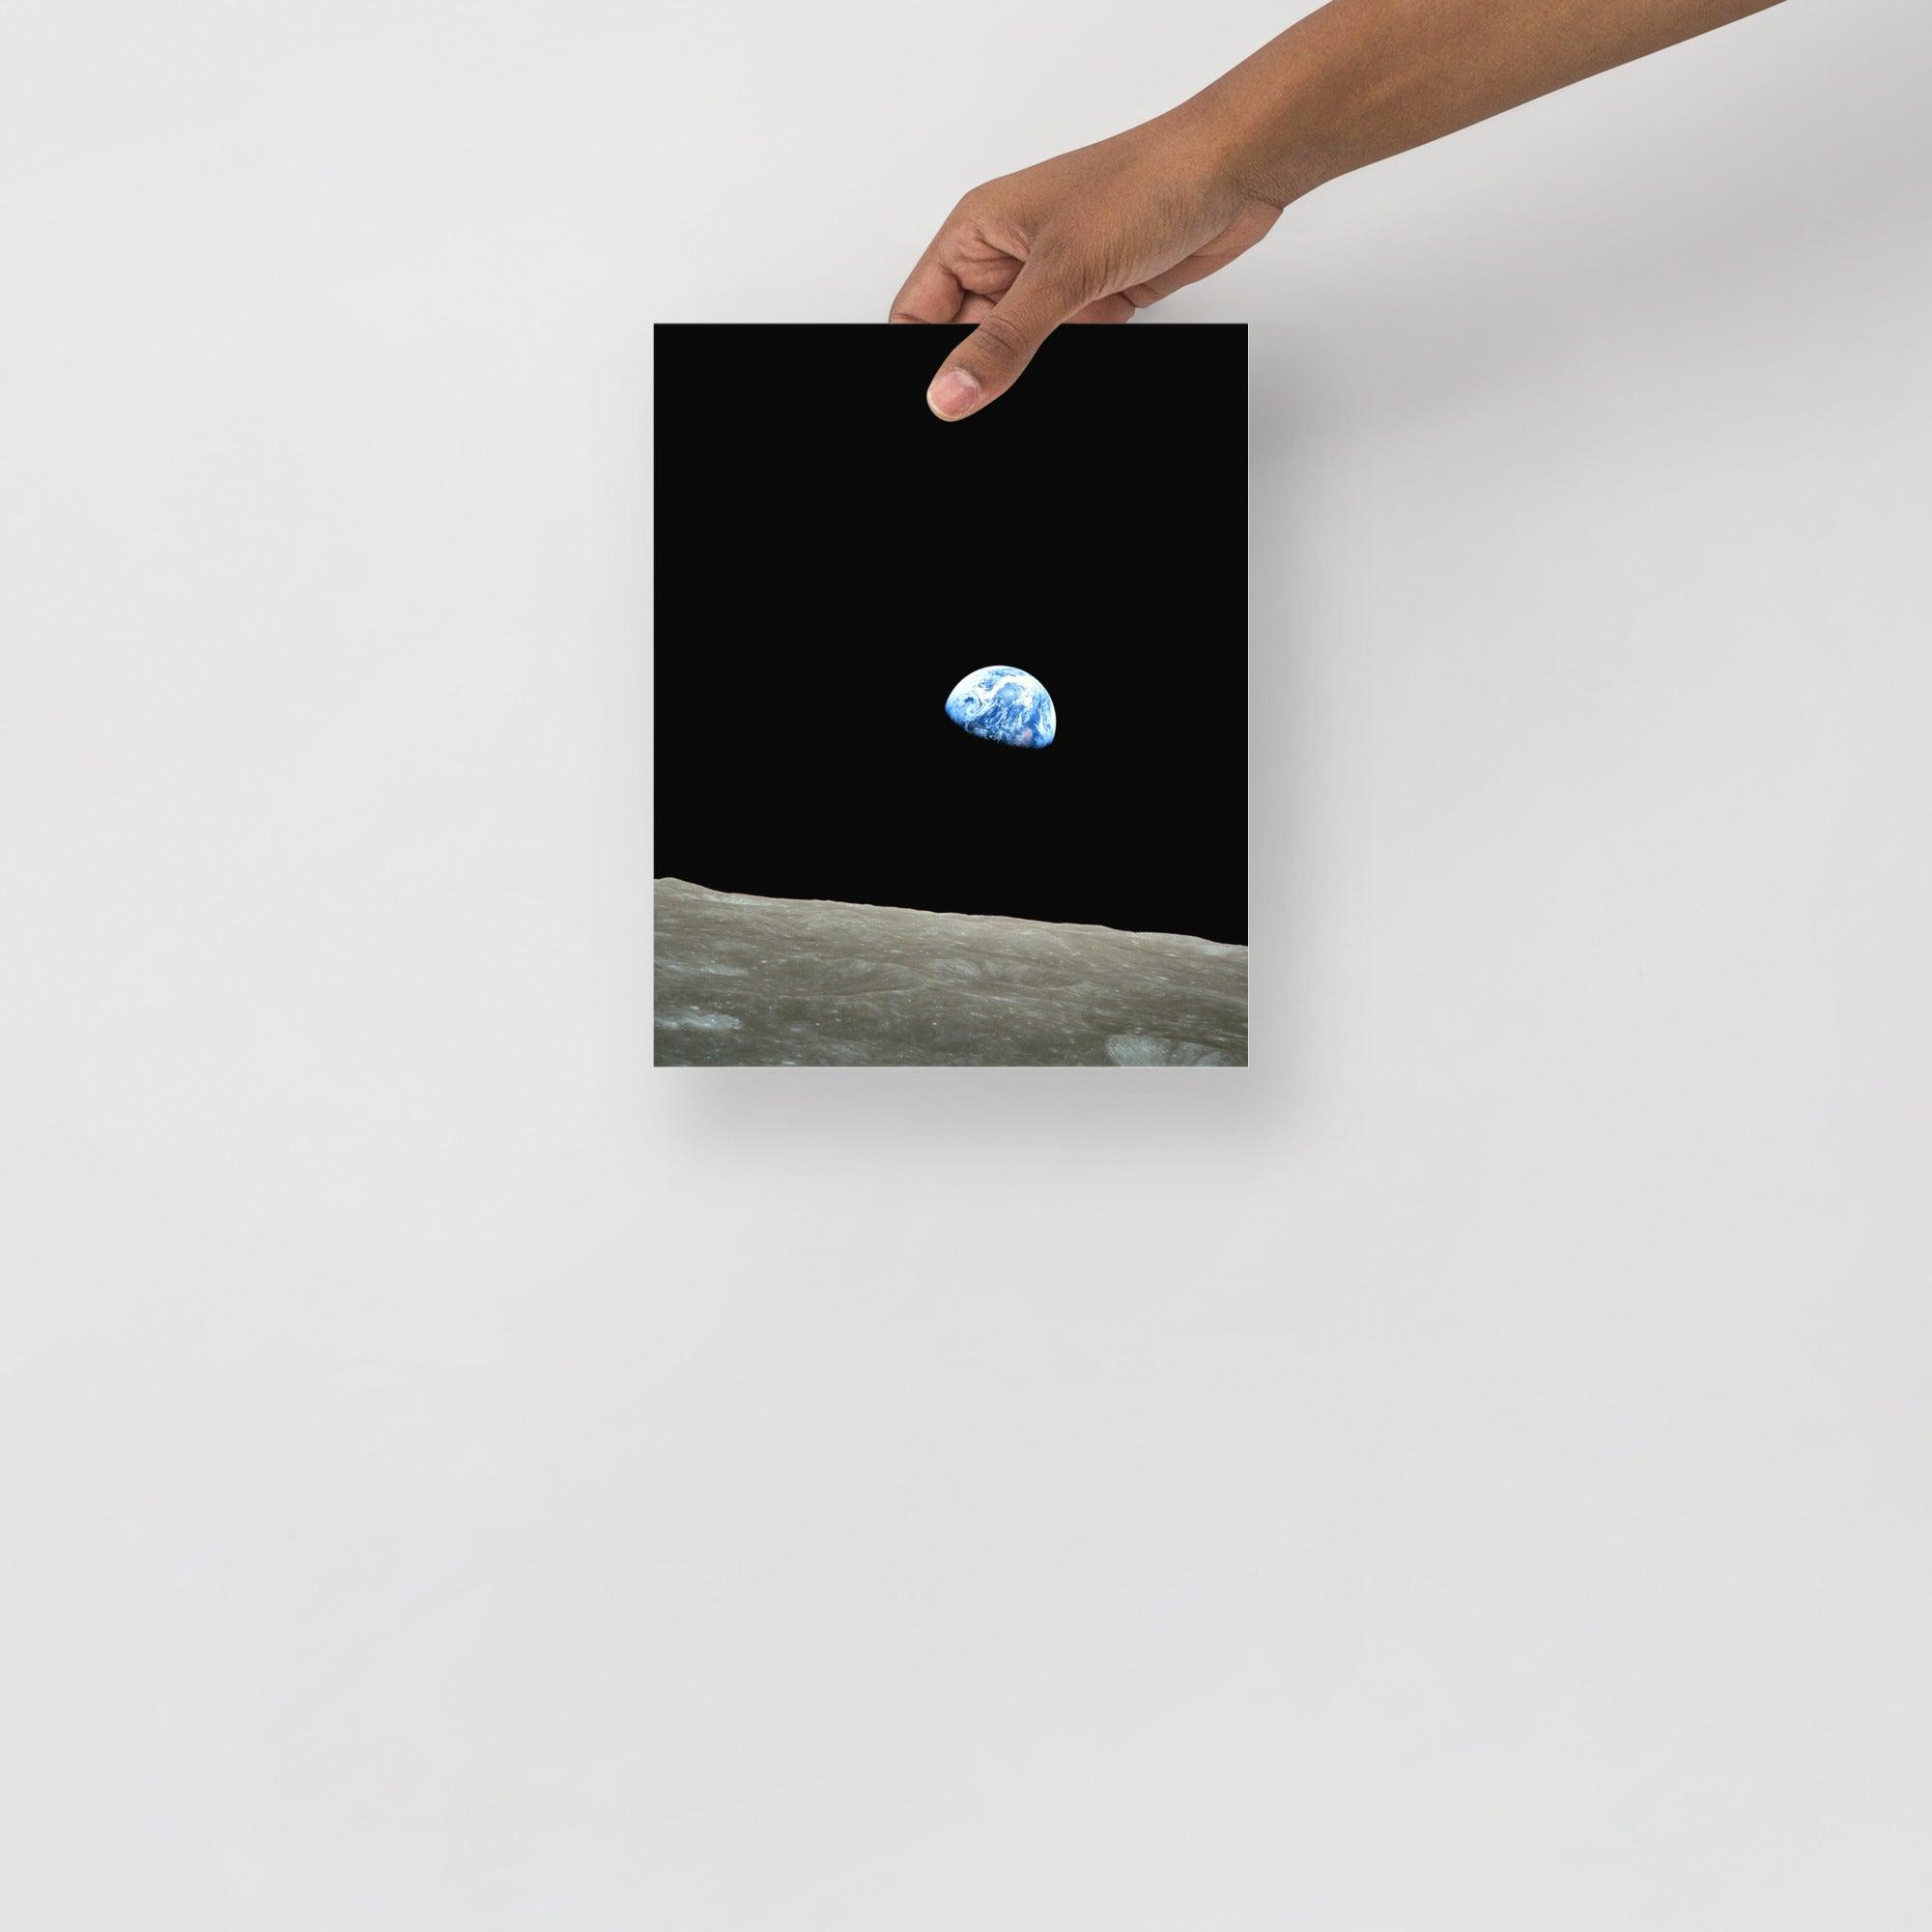 An Earthrise Apollo 8 poster on a plain backdrop in size 8x10”.